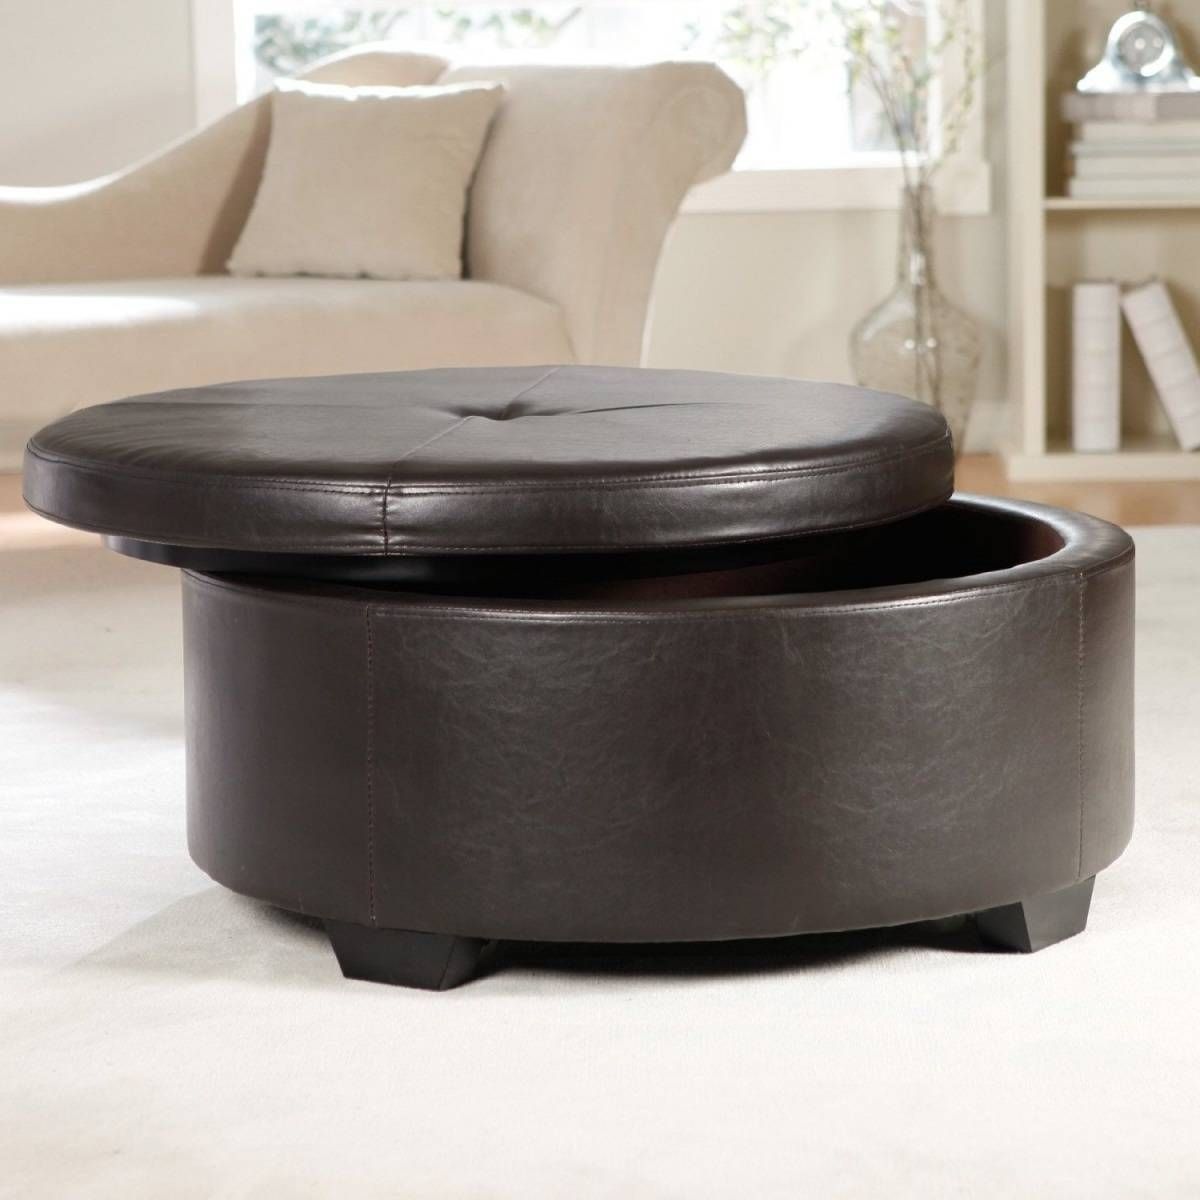 Perfect Coffee Table Storage Ottomans Underneath Throughout Round Coffee Tables With Storages (View 25 of 30)